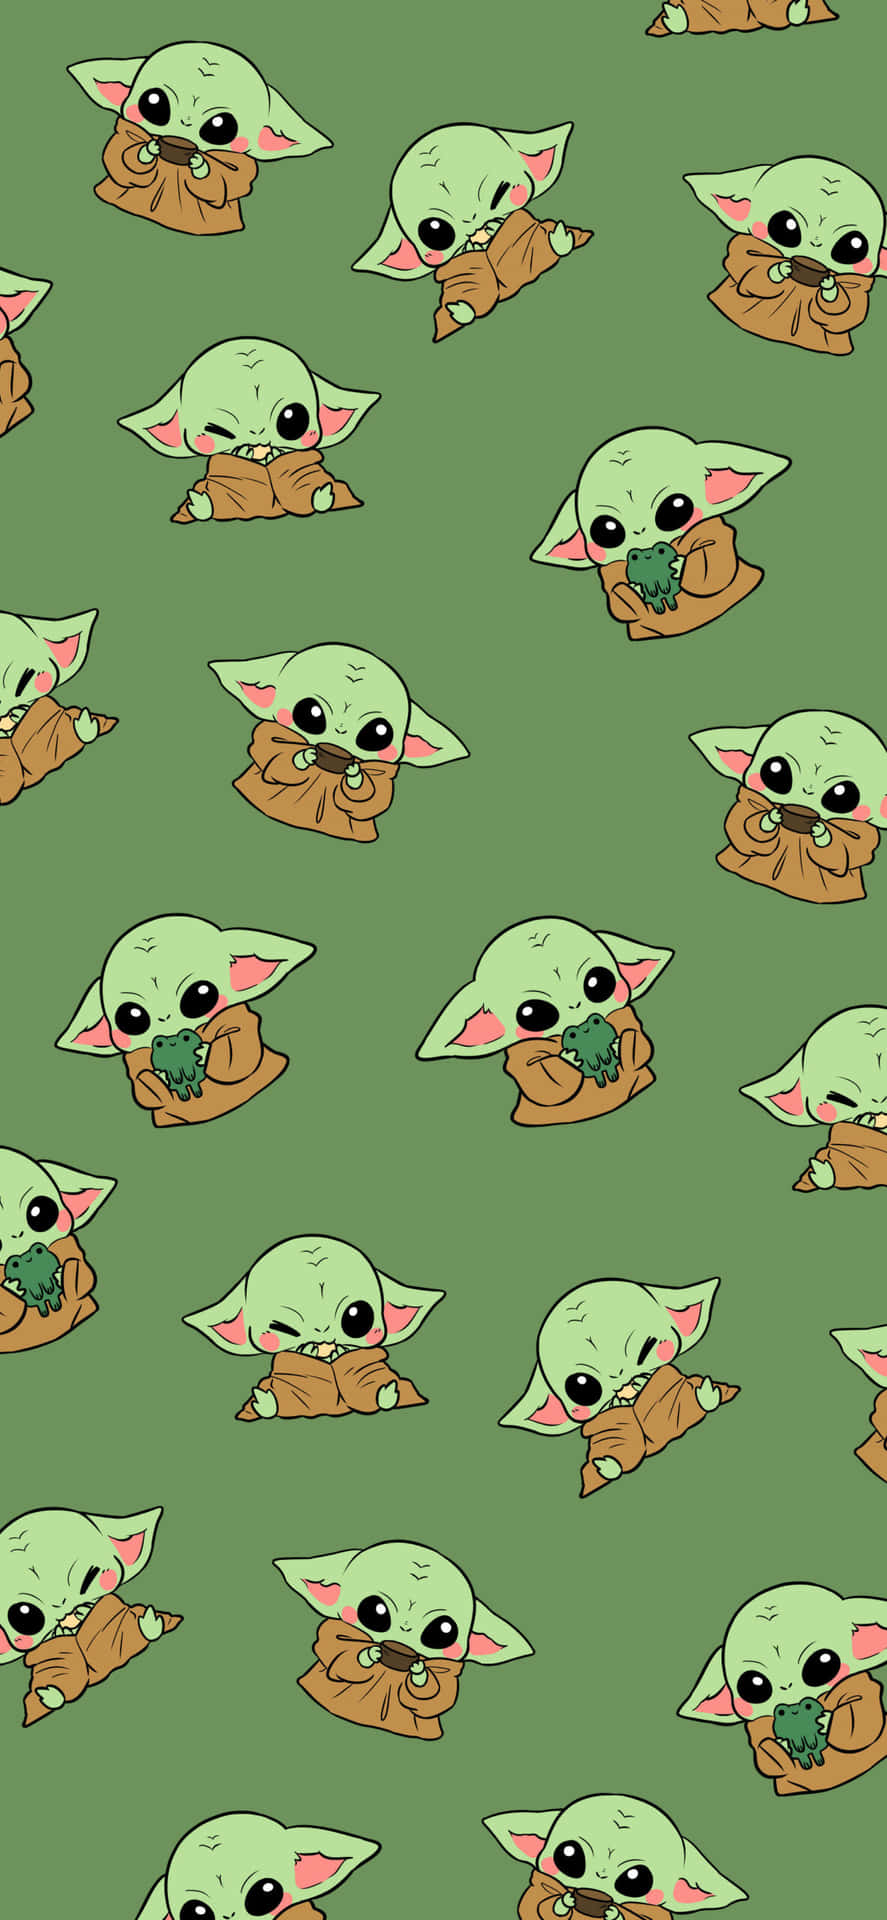 a pattern of baby yoda on a green background Wallpaper